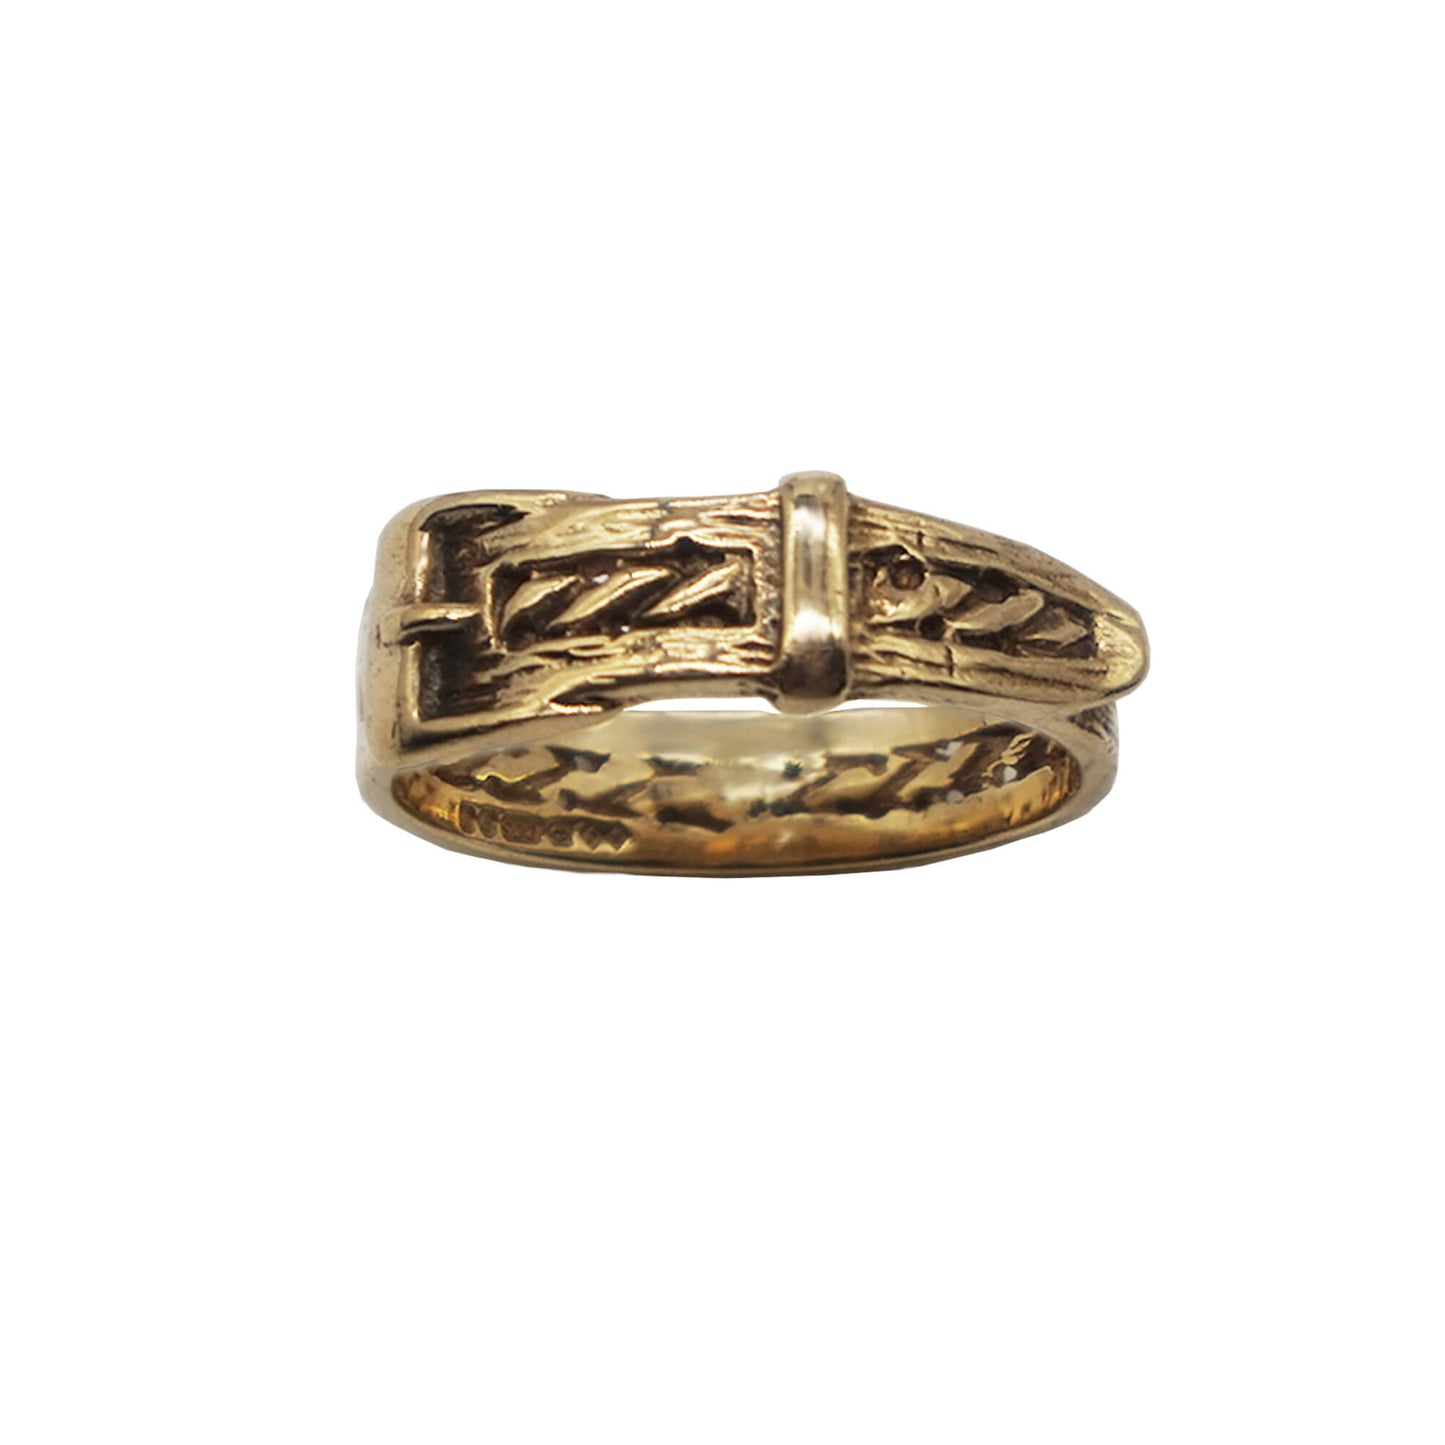 Vintage 9K gold buckle ring with braid detail.